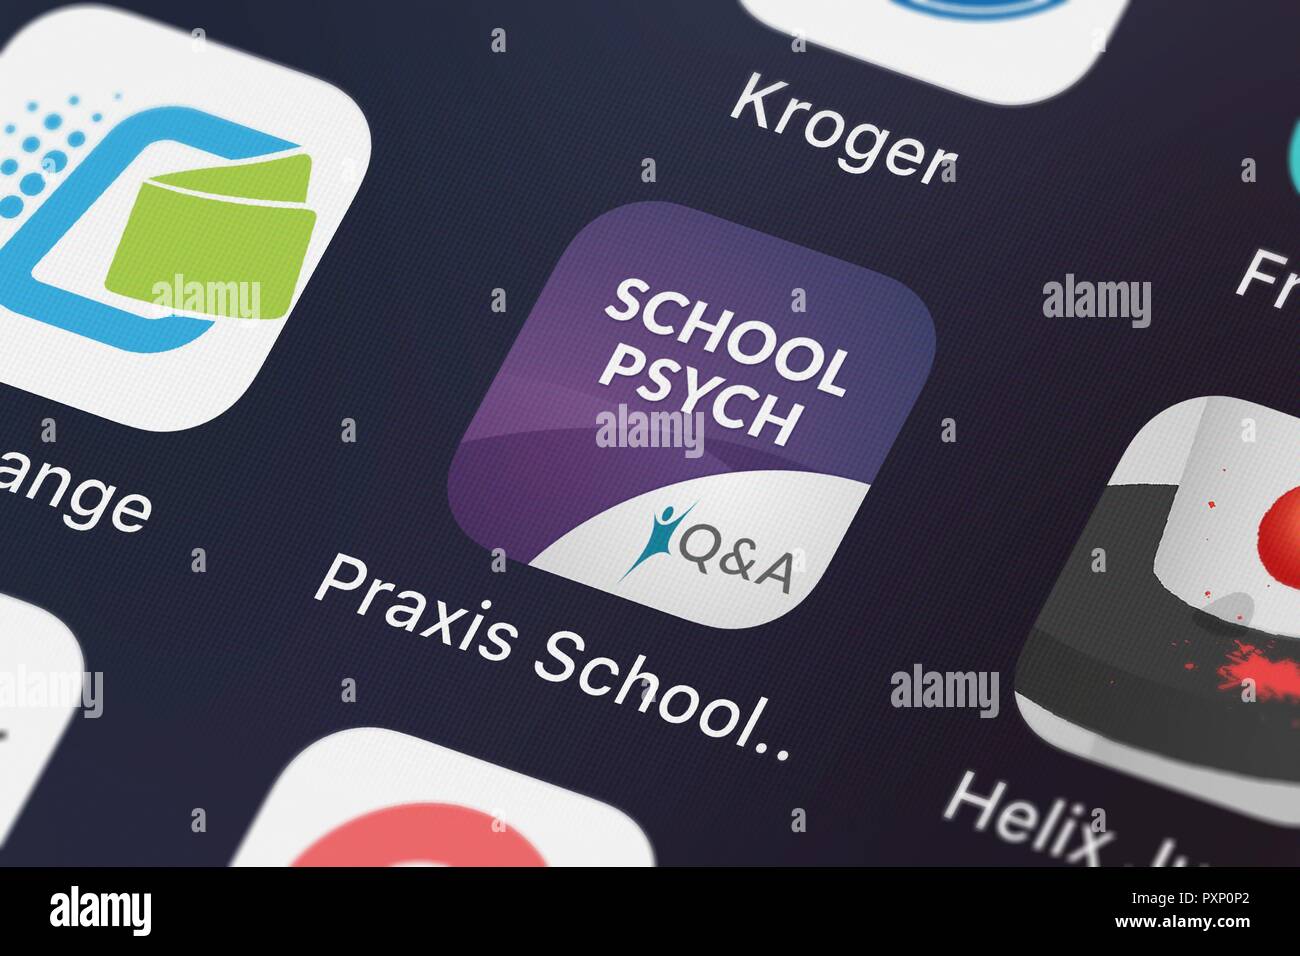 London, United Kingdom - October 23, 2018: The Praxis School Psychologist QA mobile app from Higher Learning Technologies on an iPhone screen. Stock Photo